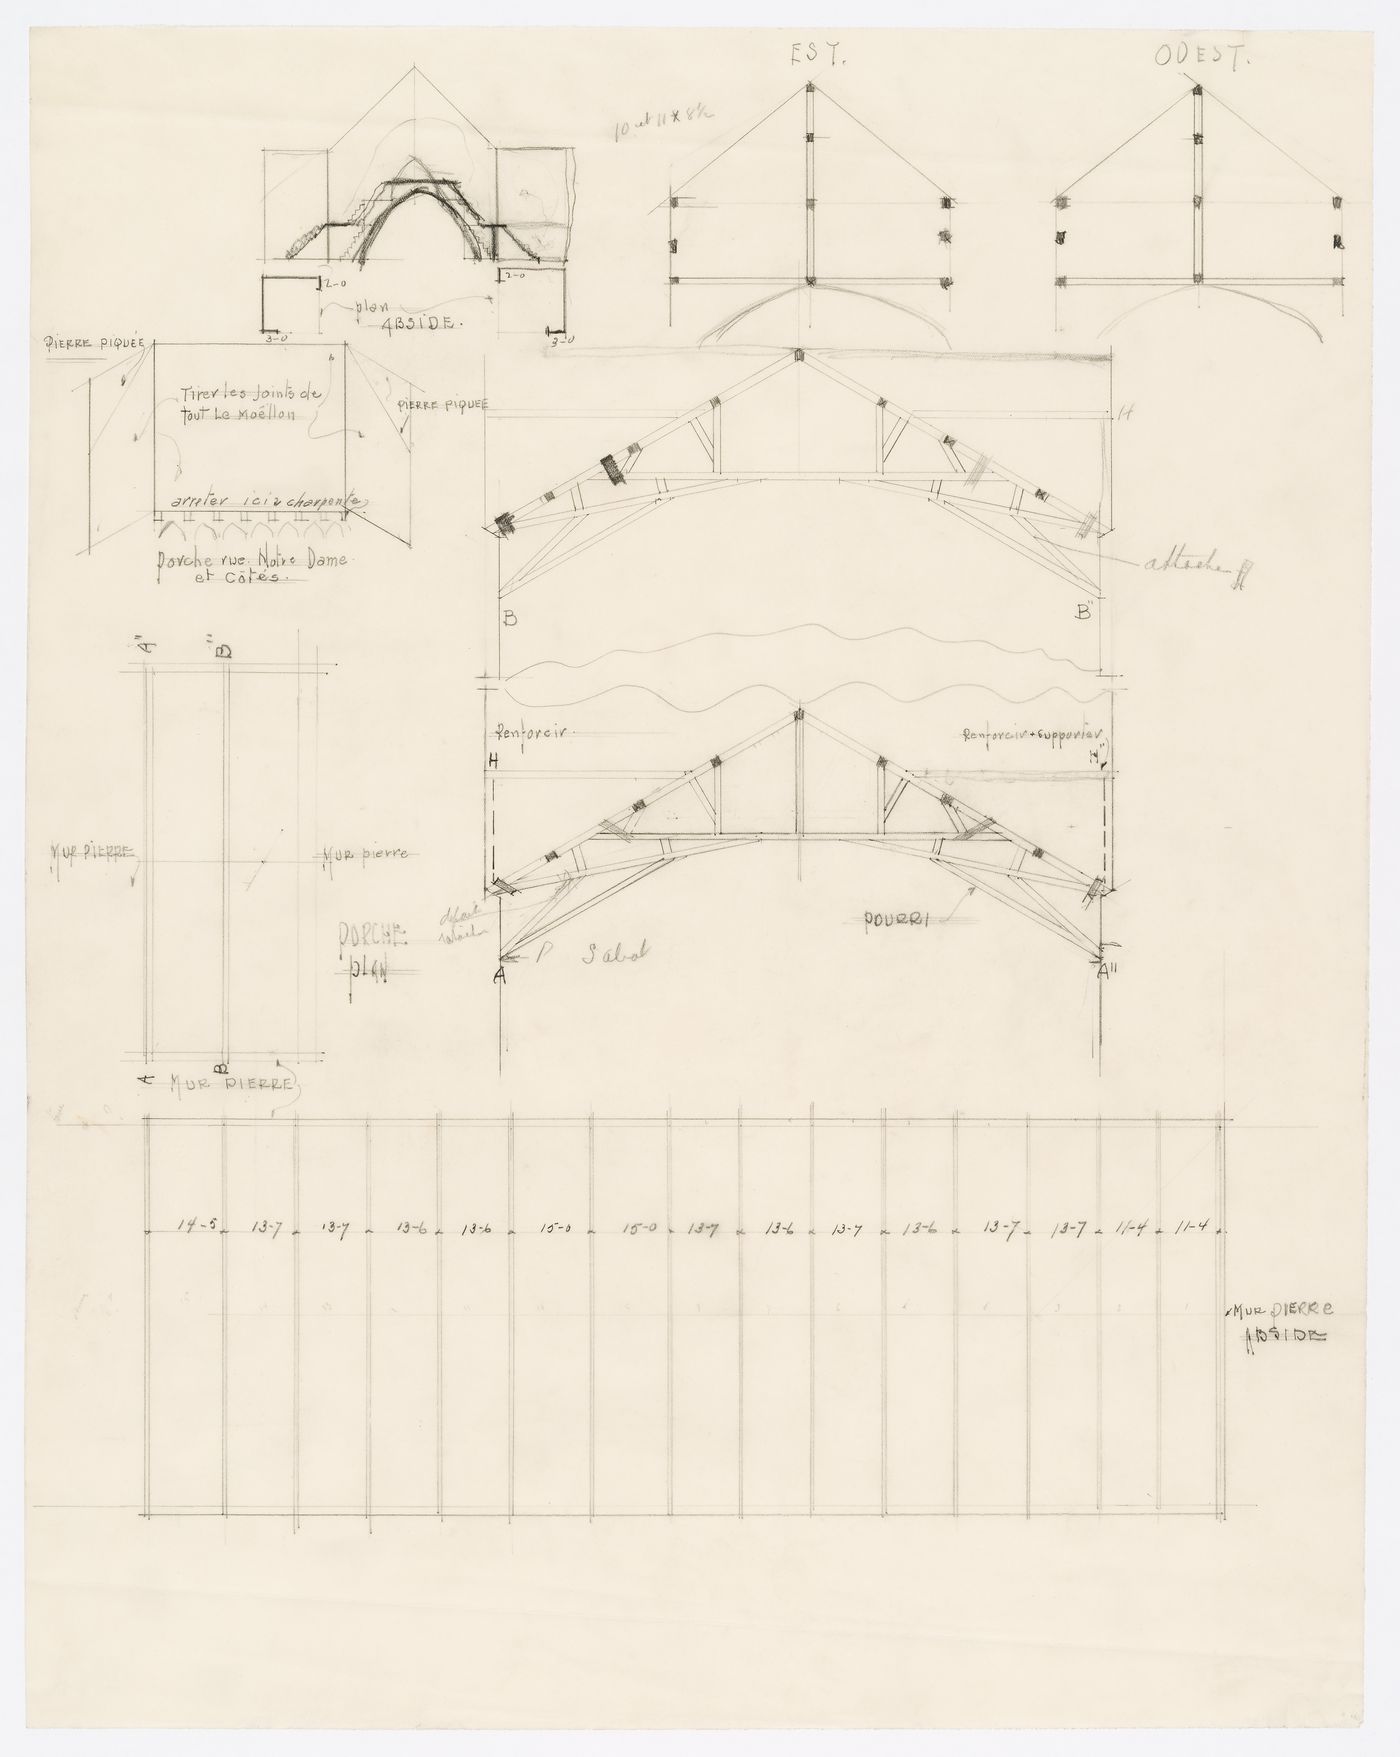 Plans and elevations for the roof structure and replacement trusses for Notre-Dame de Montréal, apparently for the renovations of 1929-1949